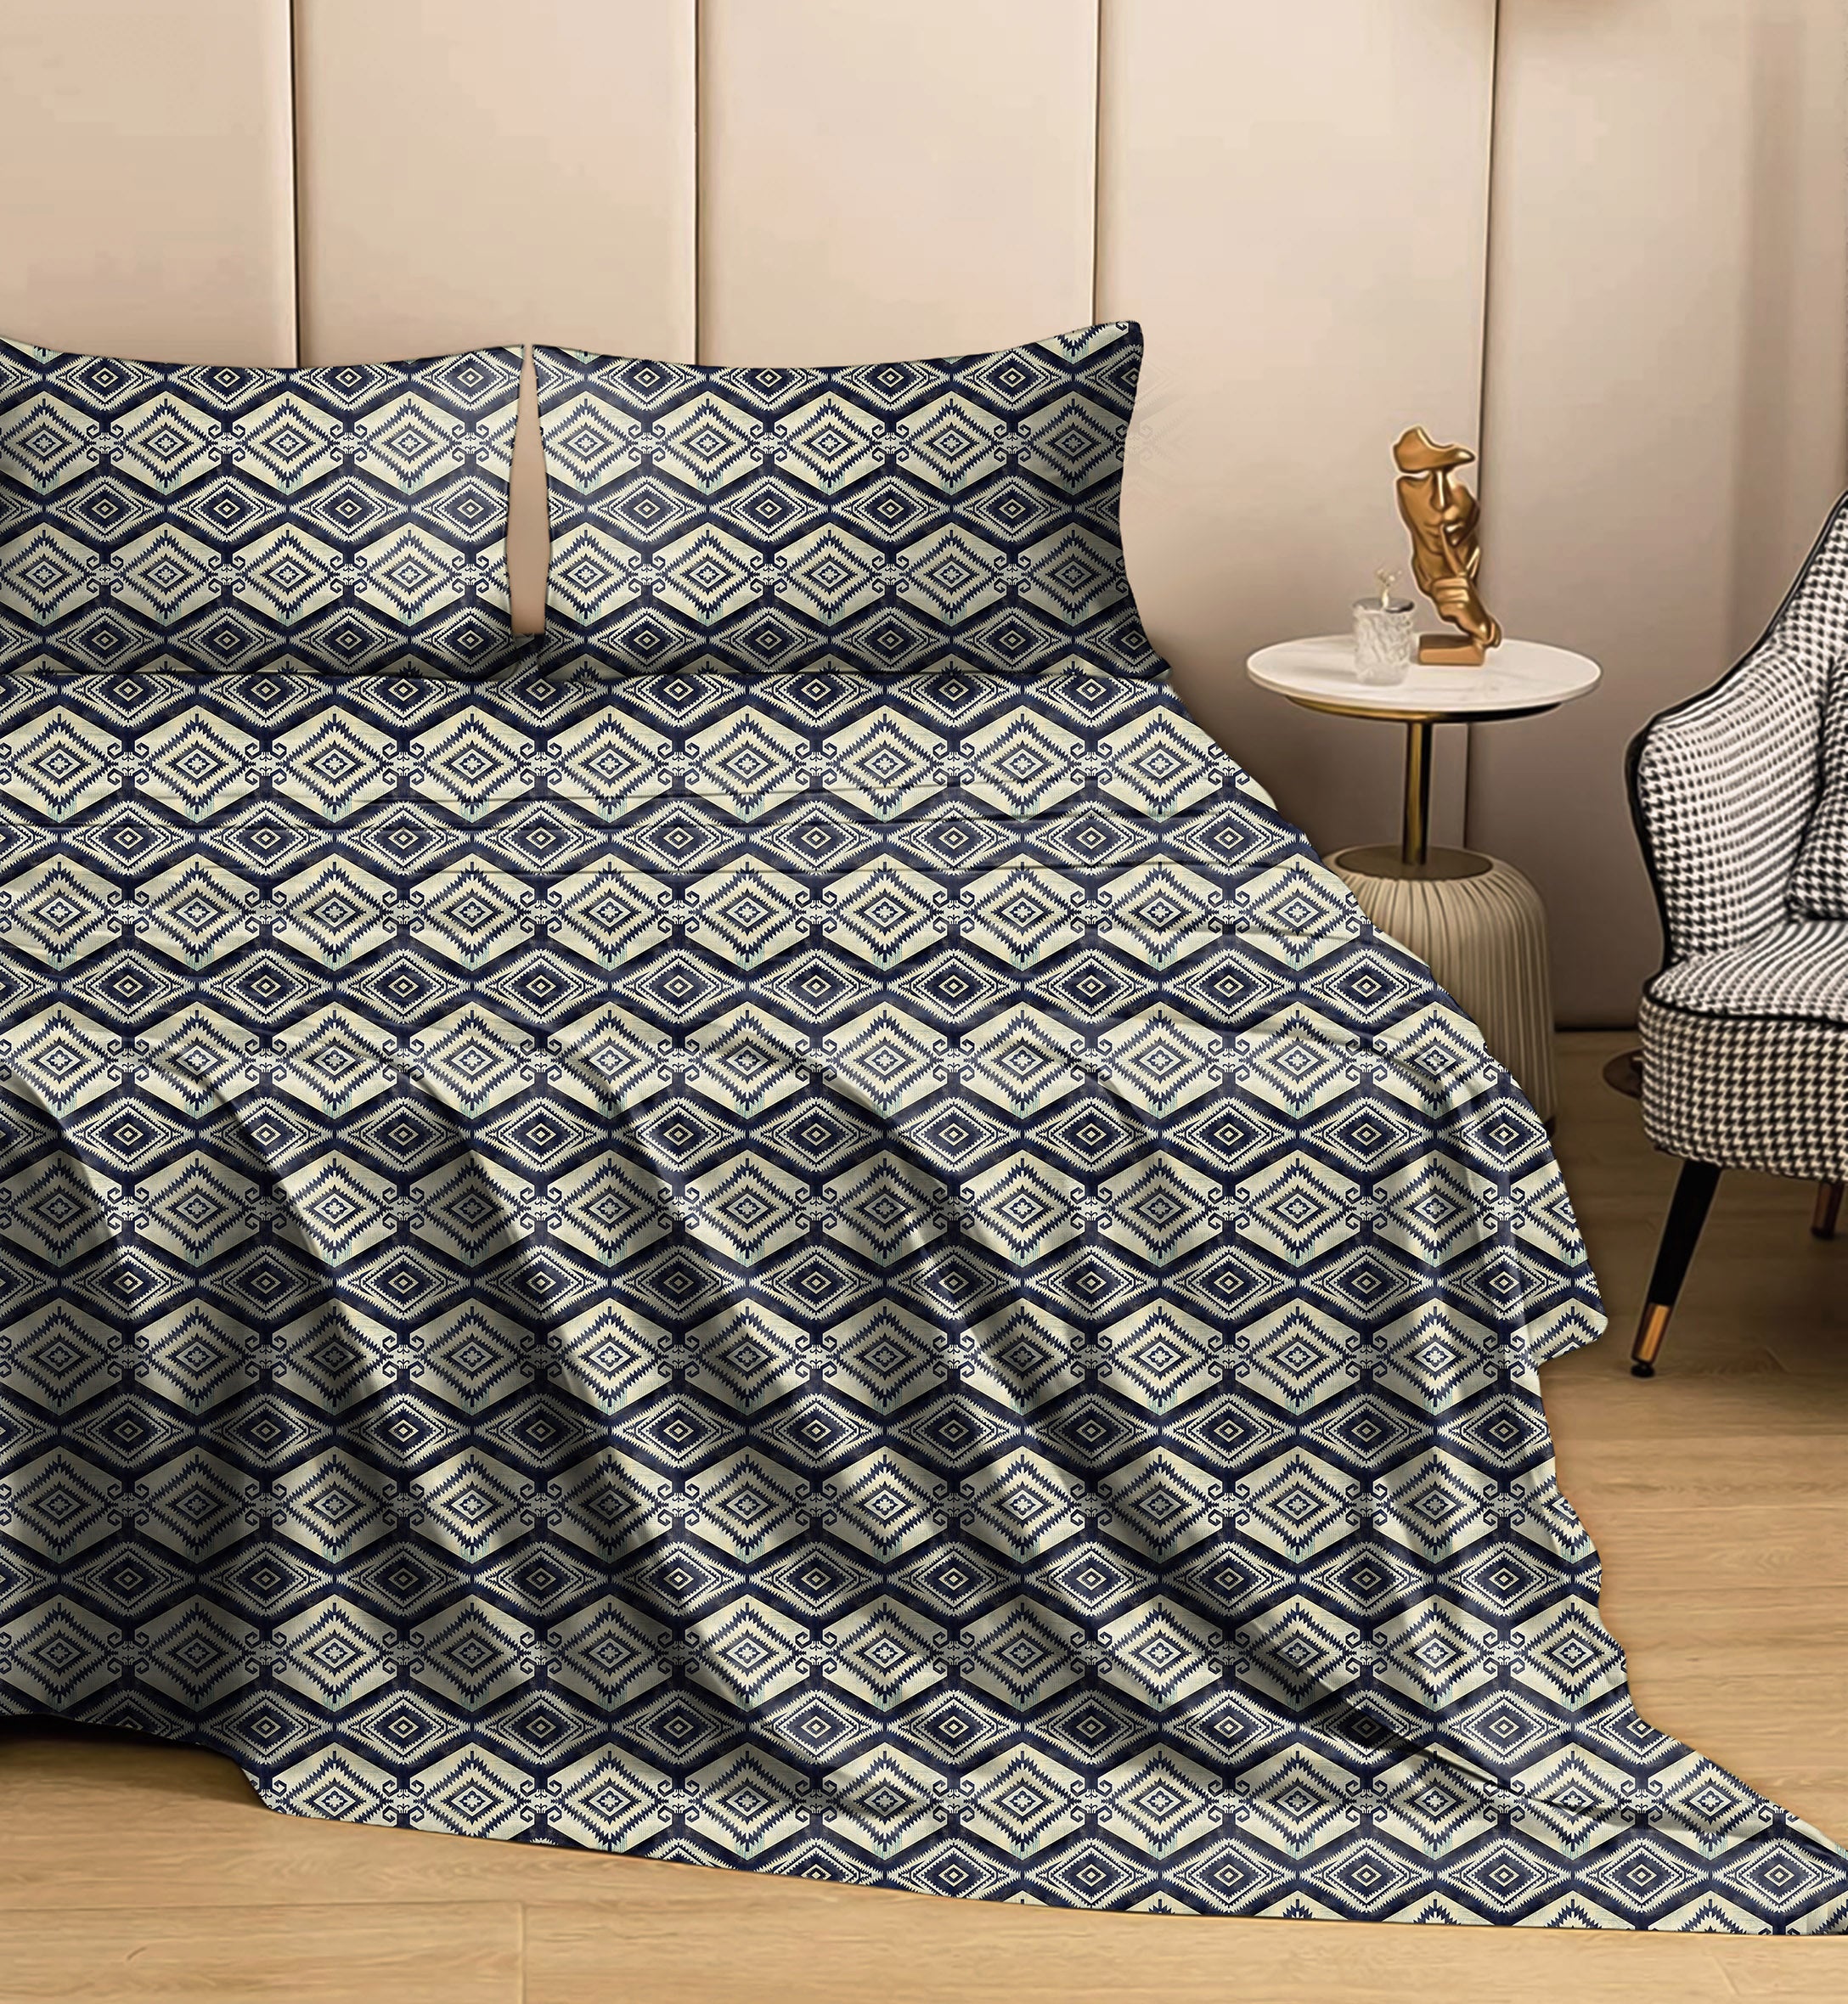 Madrid Navy Bedcover for Double Bed with 2 PillowCovers King Size (104" X 90")